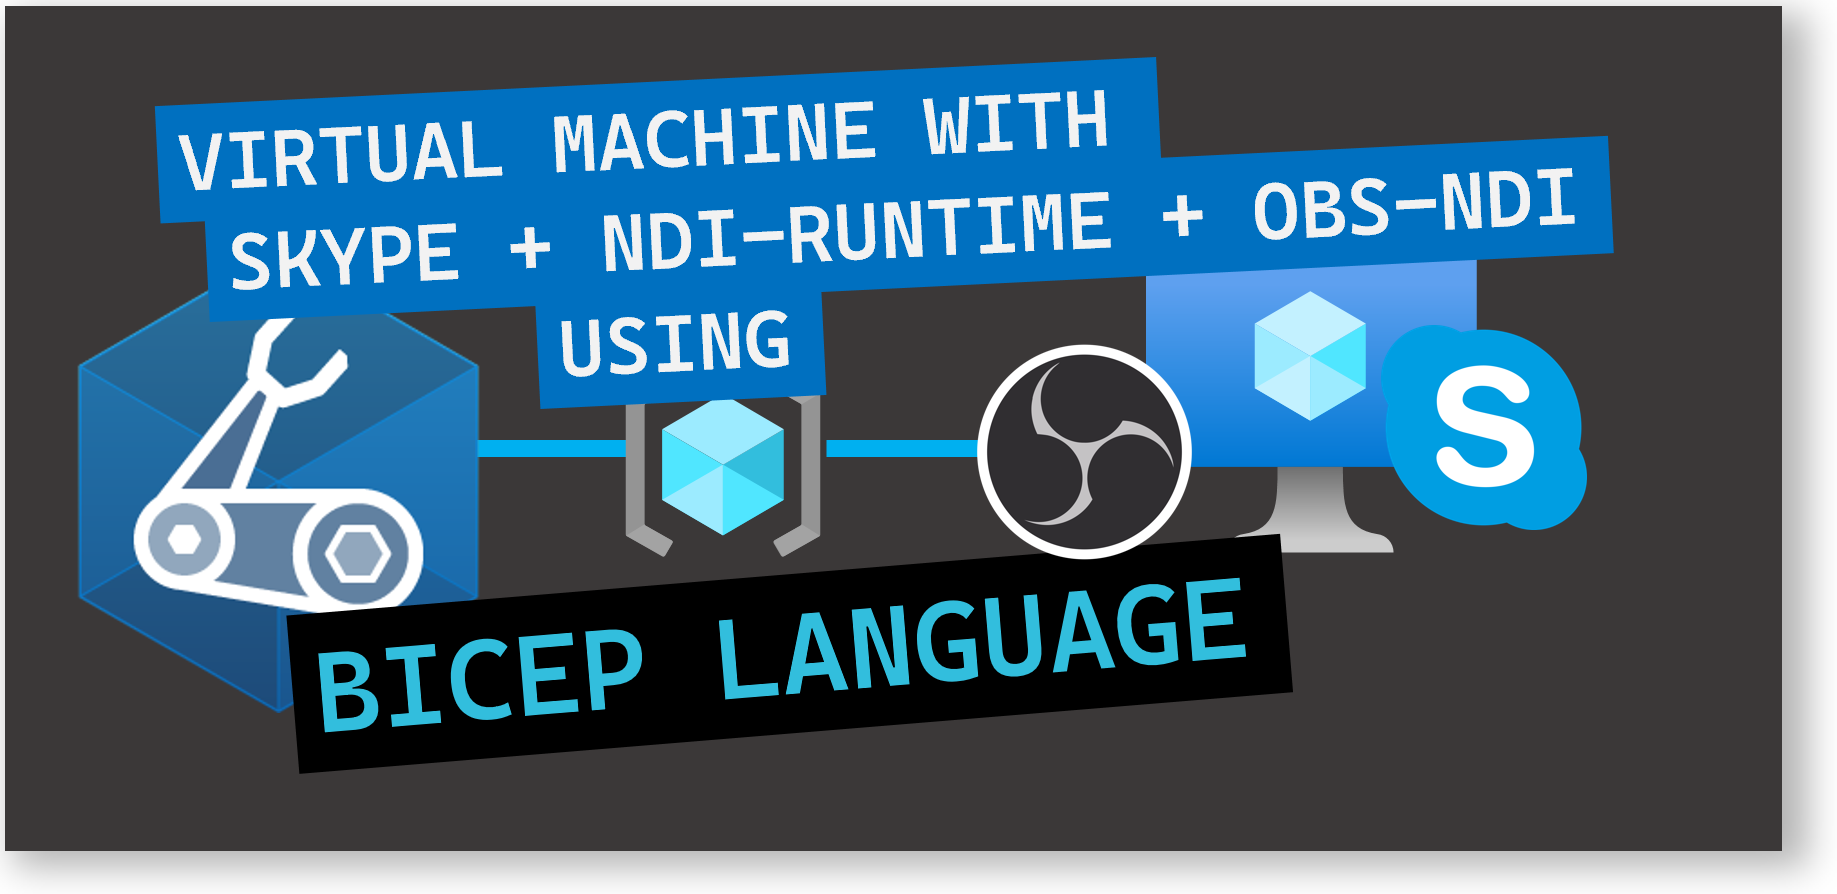 Deploy A Virtual Machine With Skype Ndi Runtime And Obs Ndi Installed Using Bicep By Dave R Microsoft Azure Mvp Codex Oct 21 Medium